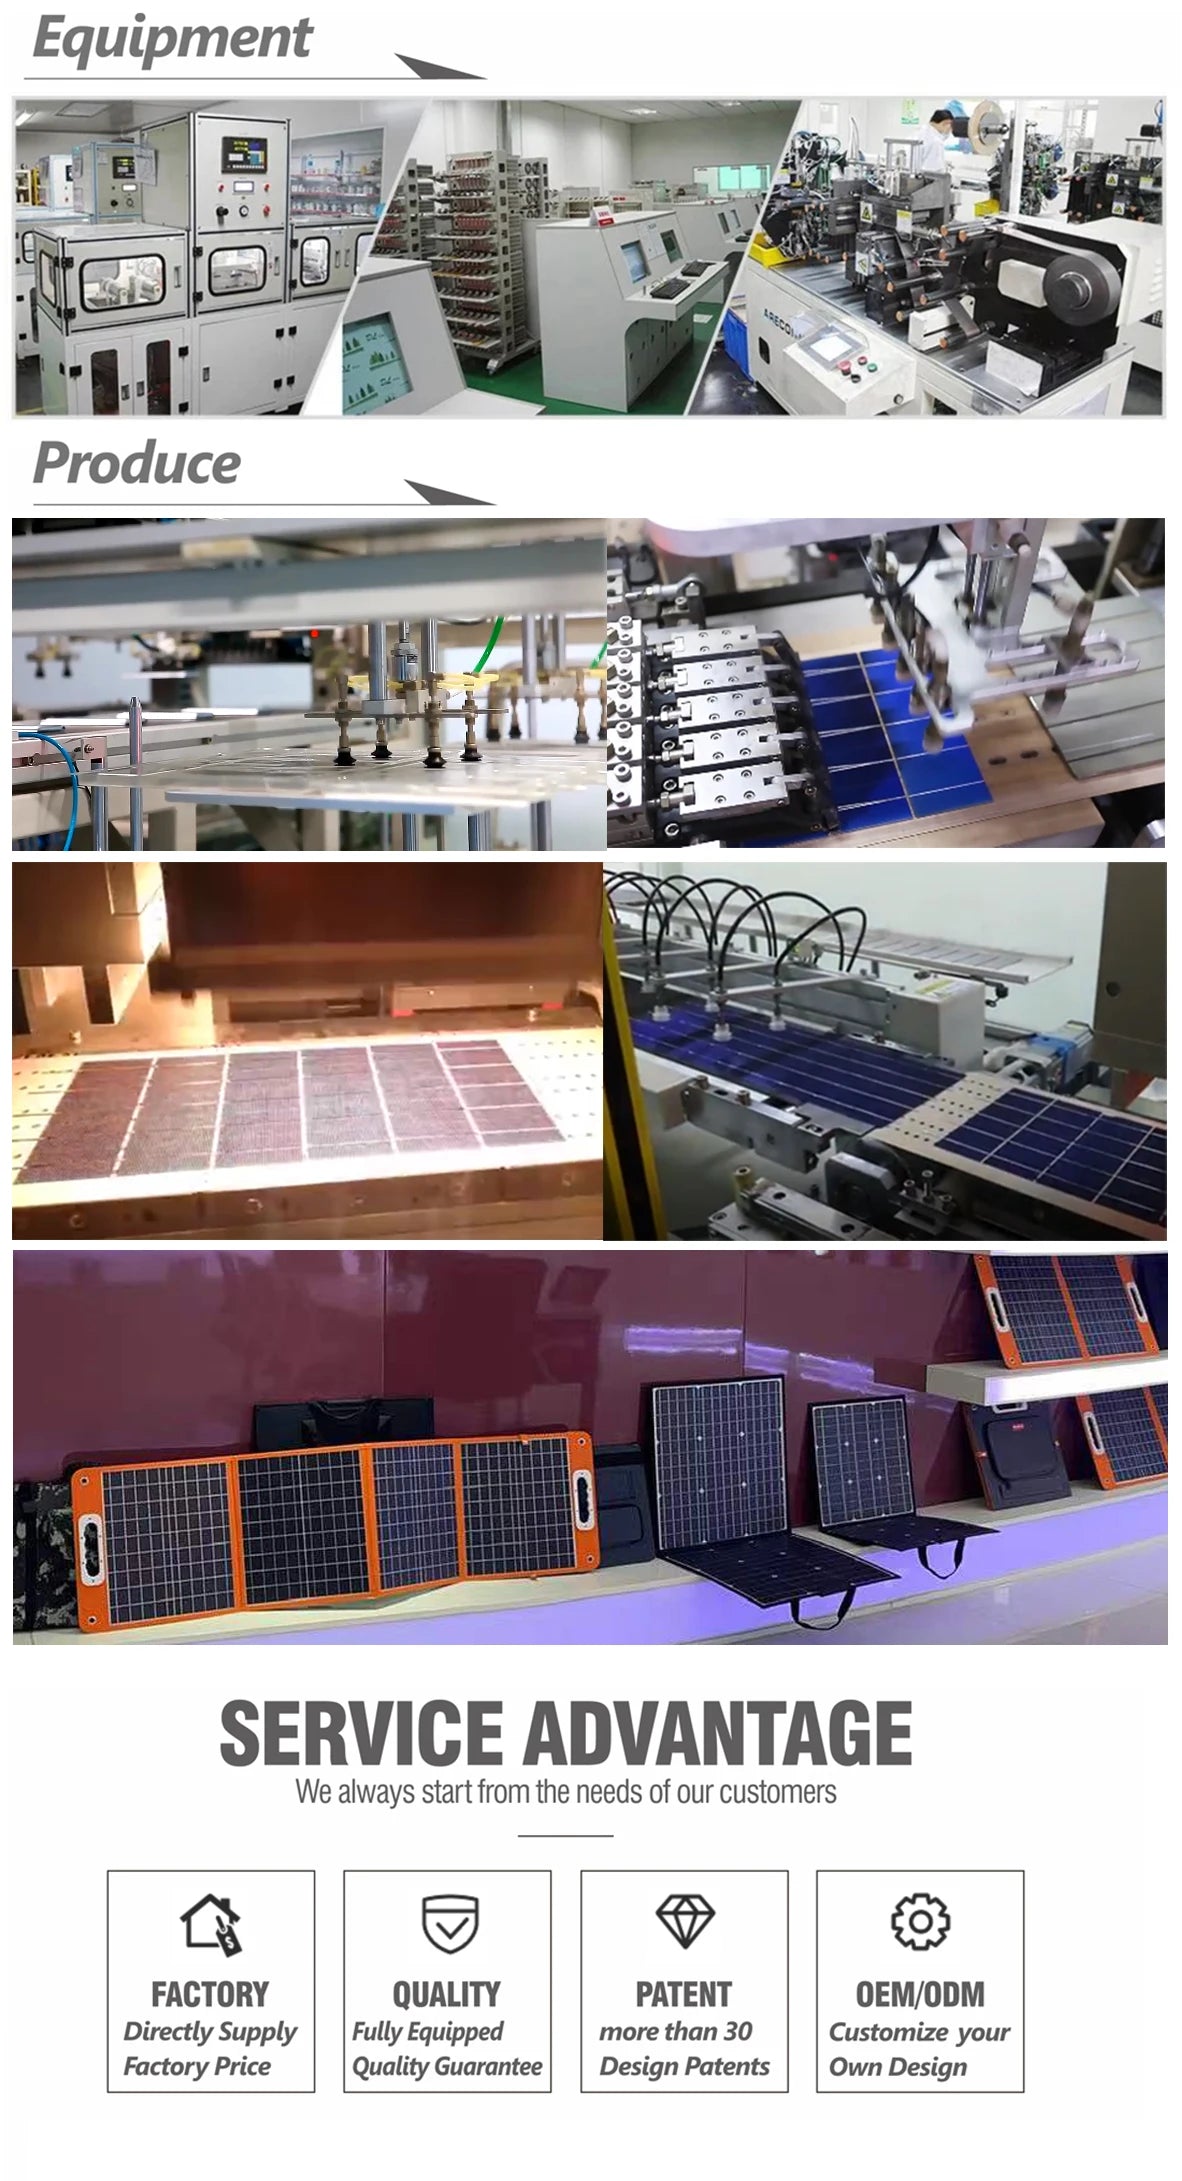 FlashFish Solar Panel, High-quality, customizable products supplied directly at competitive prices for a premium customer experience.